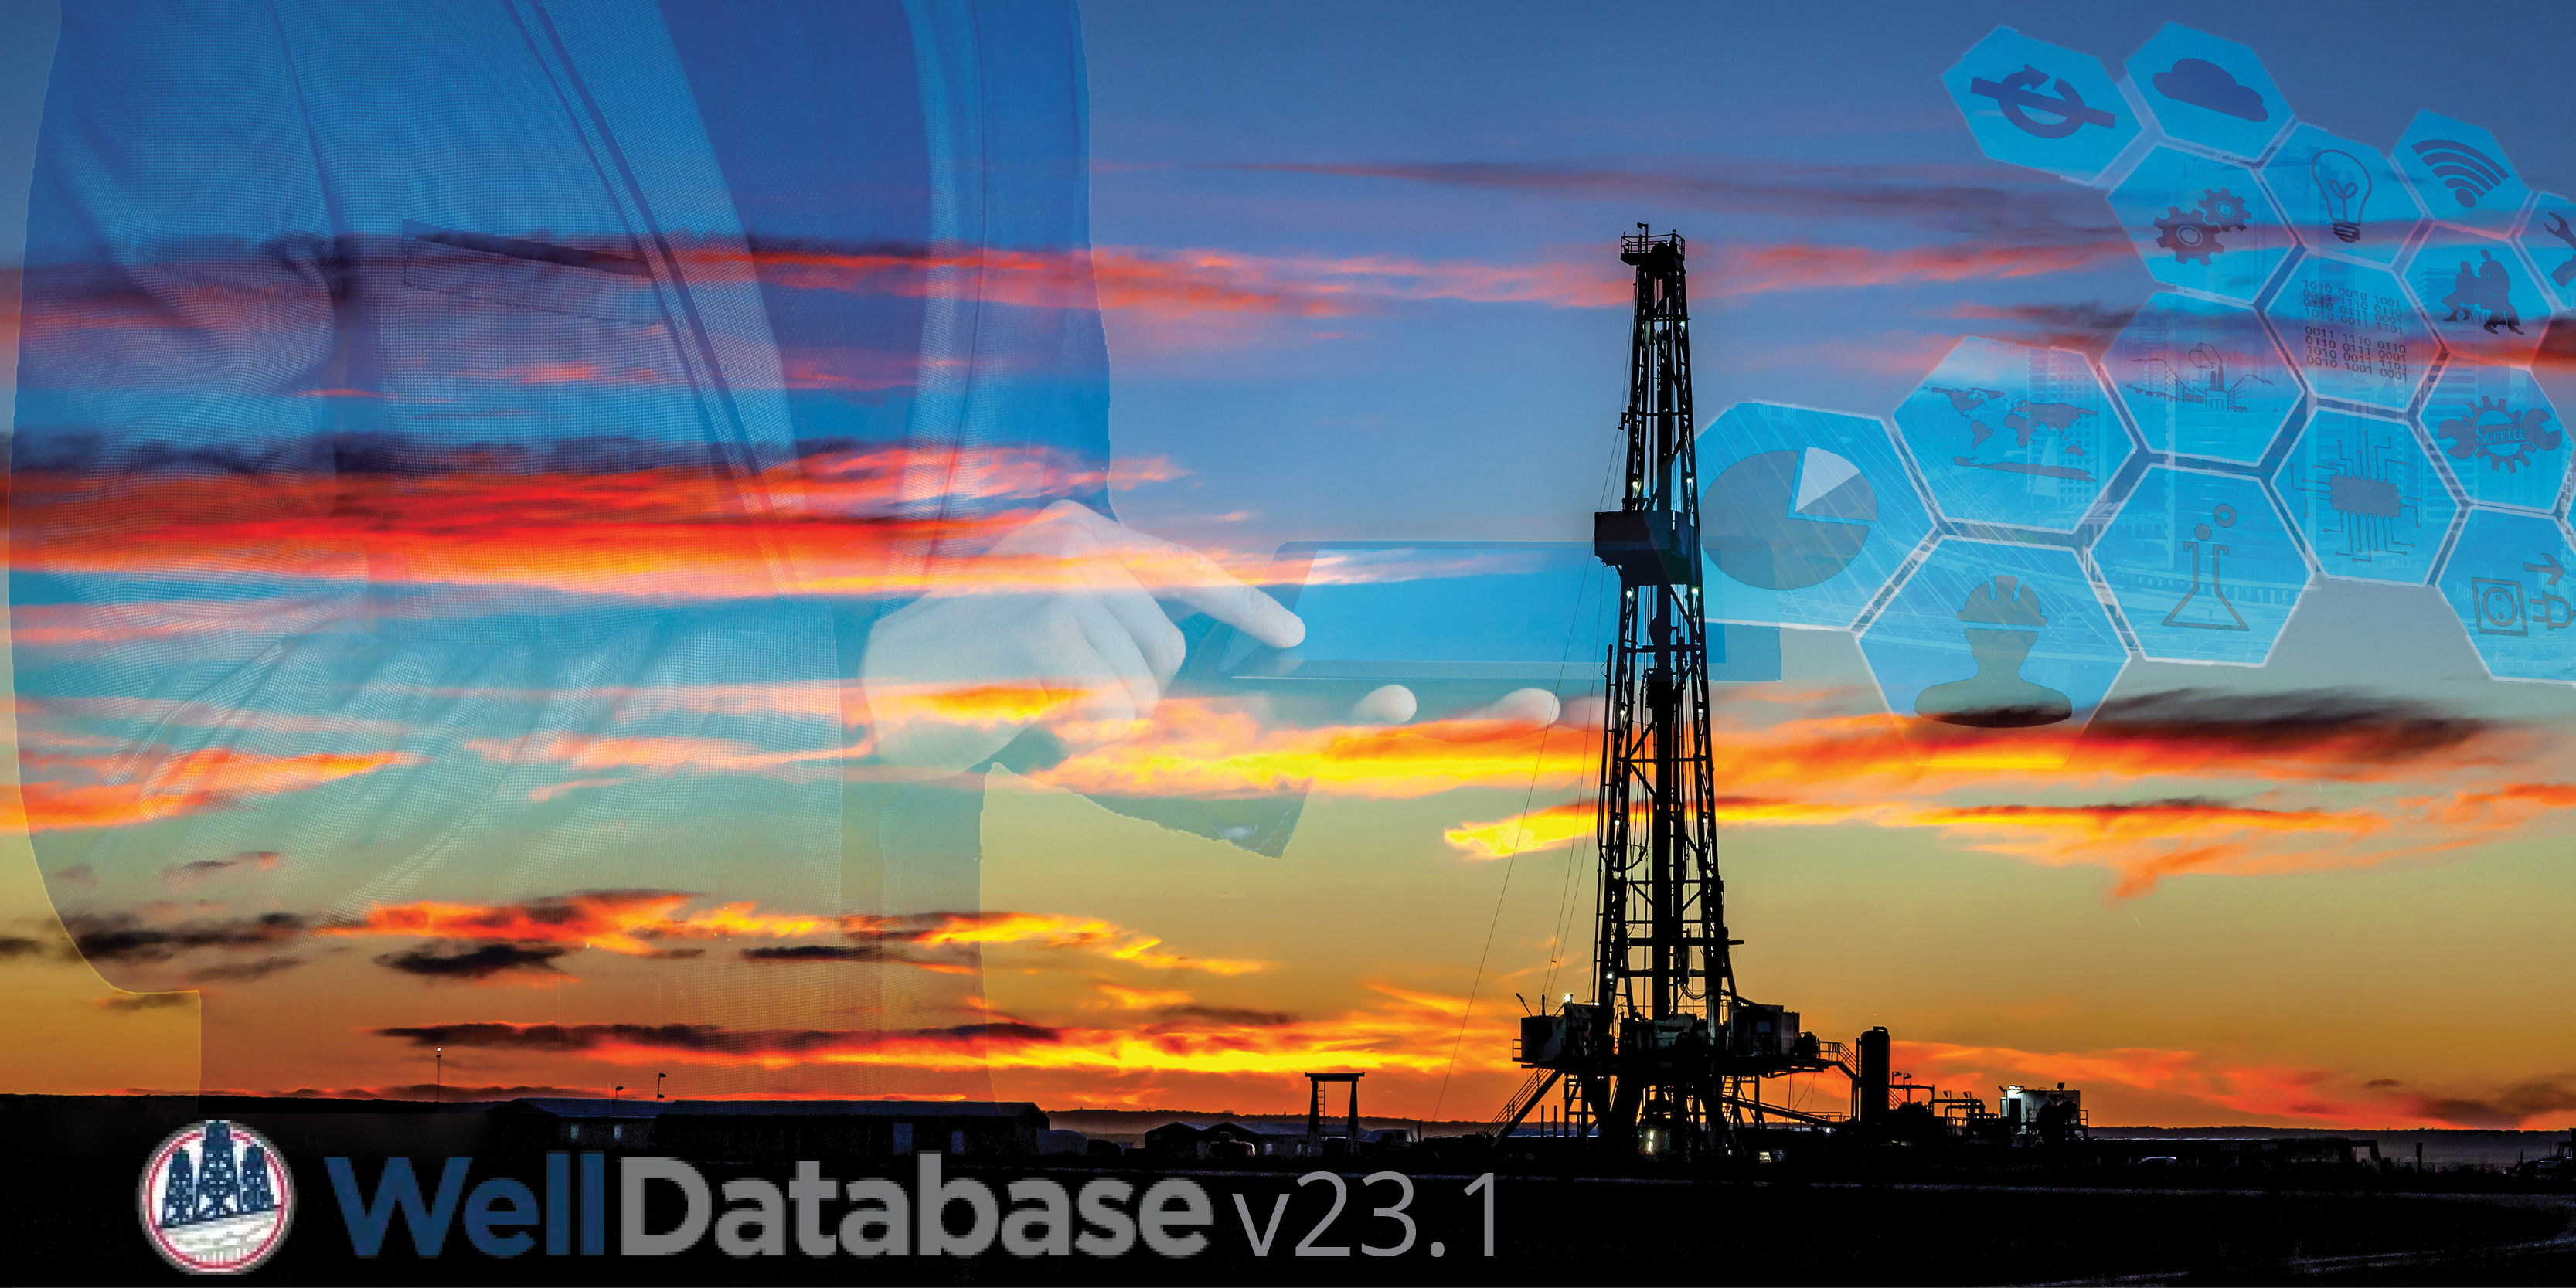 Advanced mapping and analytics for oil and gas industry